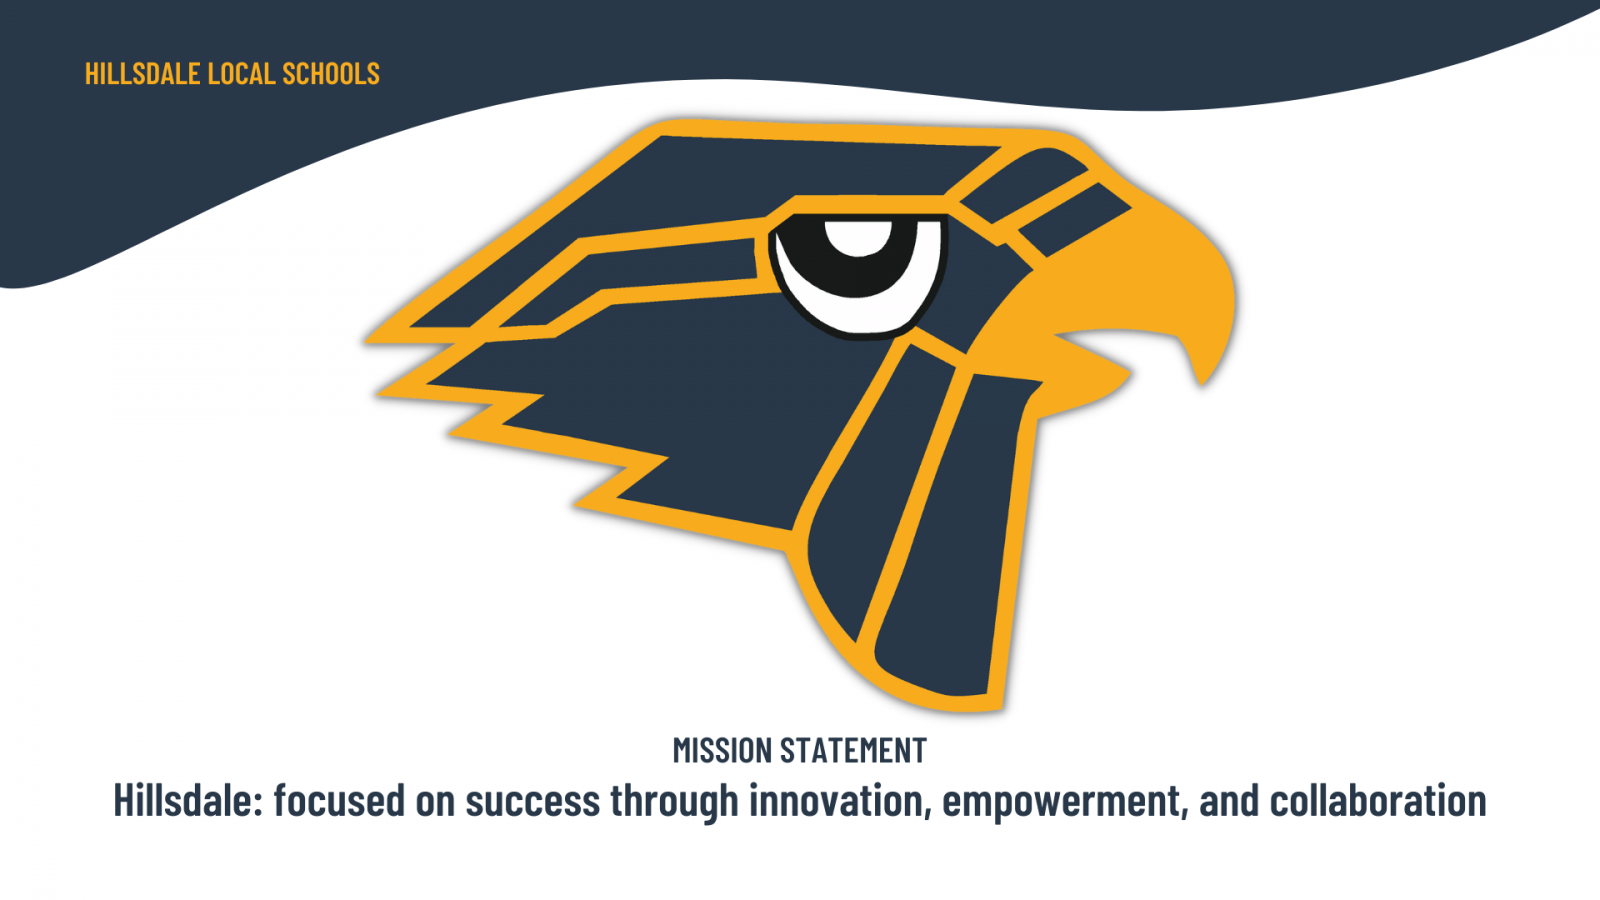 An image of the school's logo and mission statement.